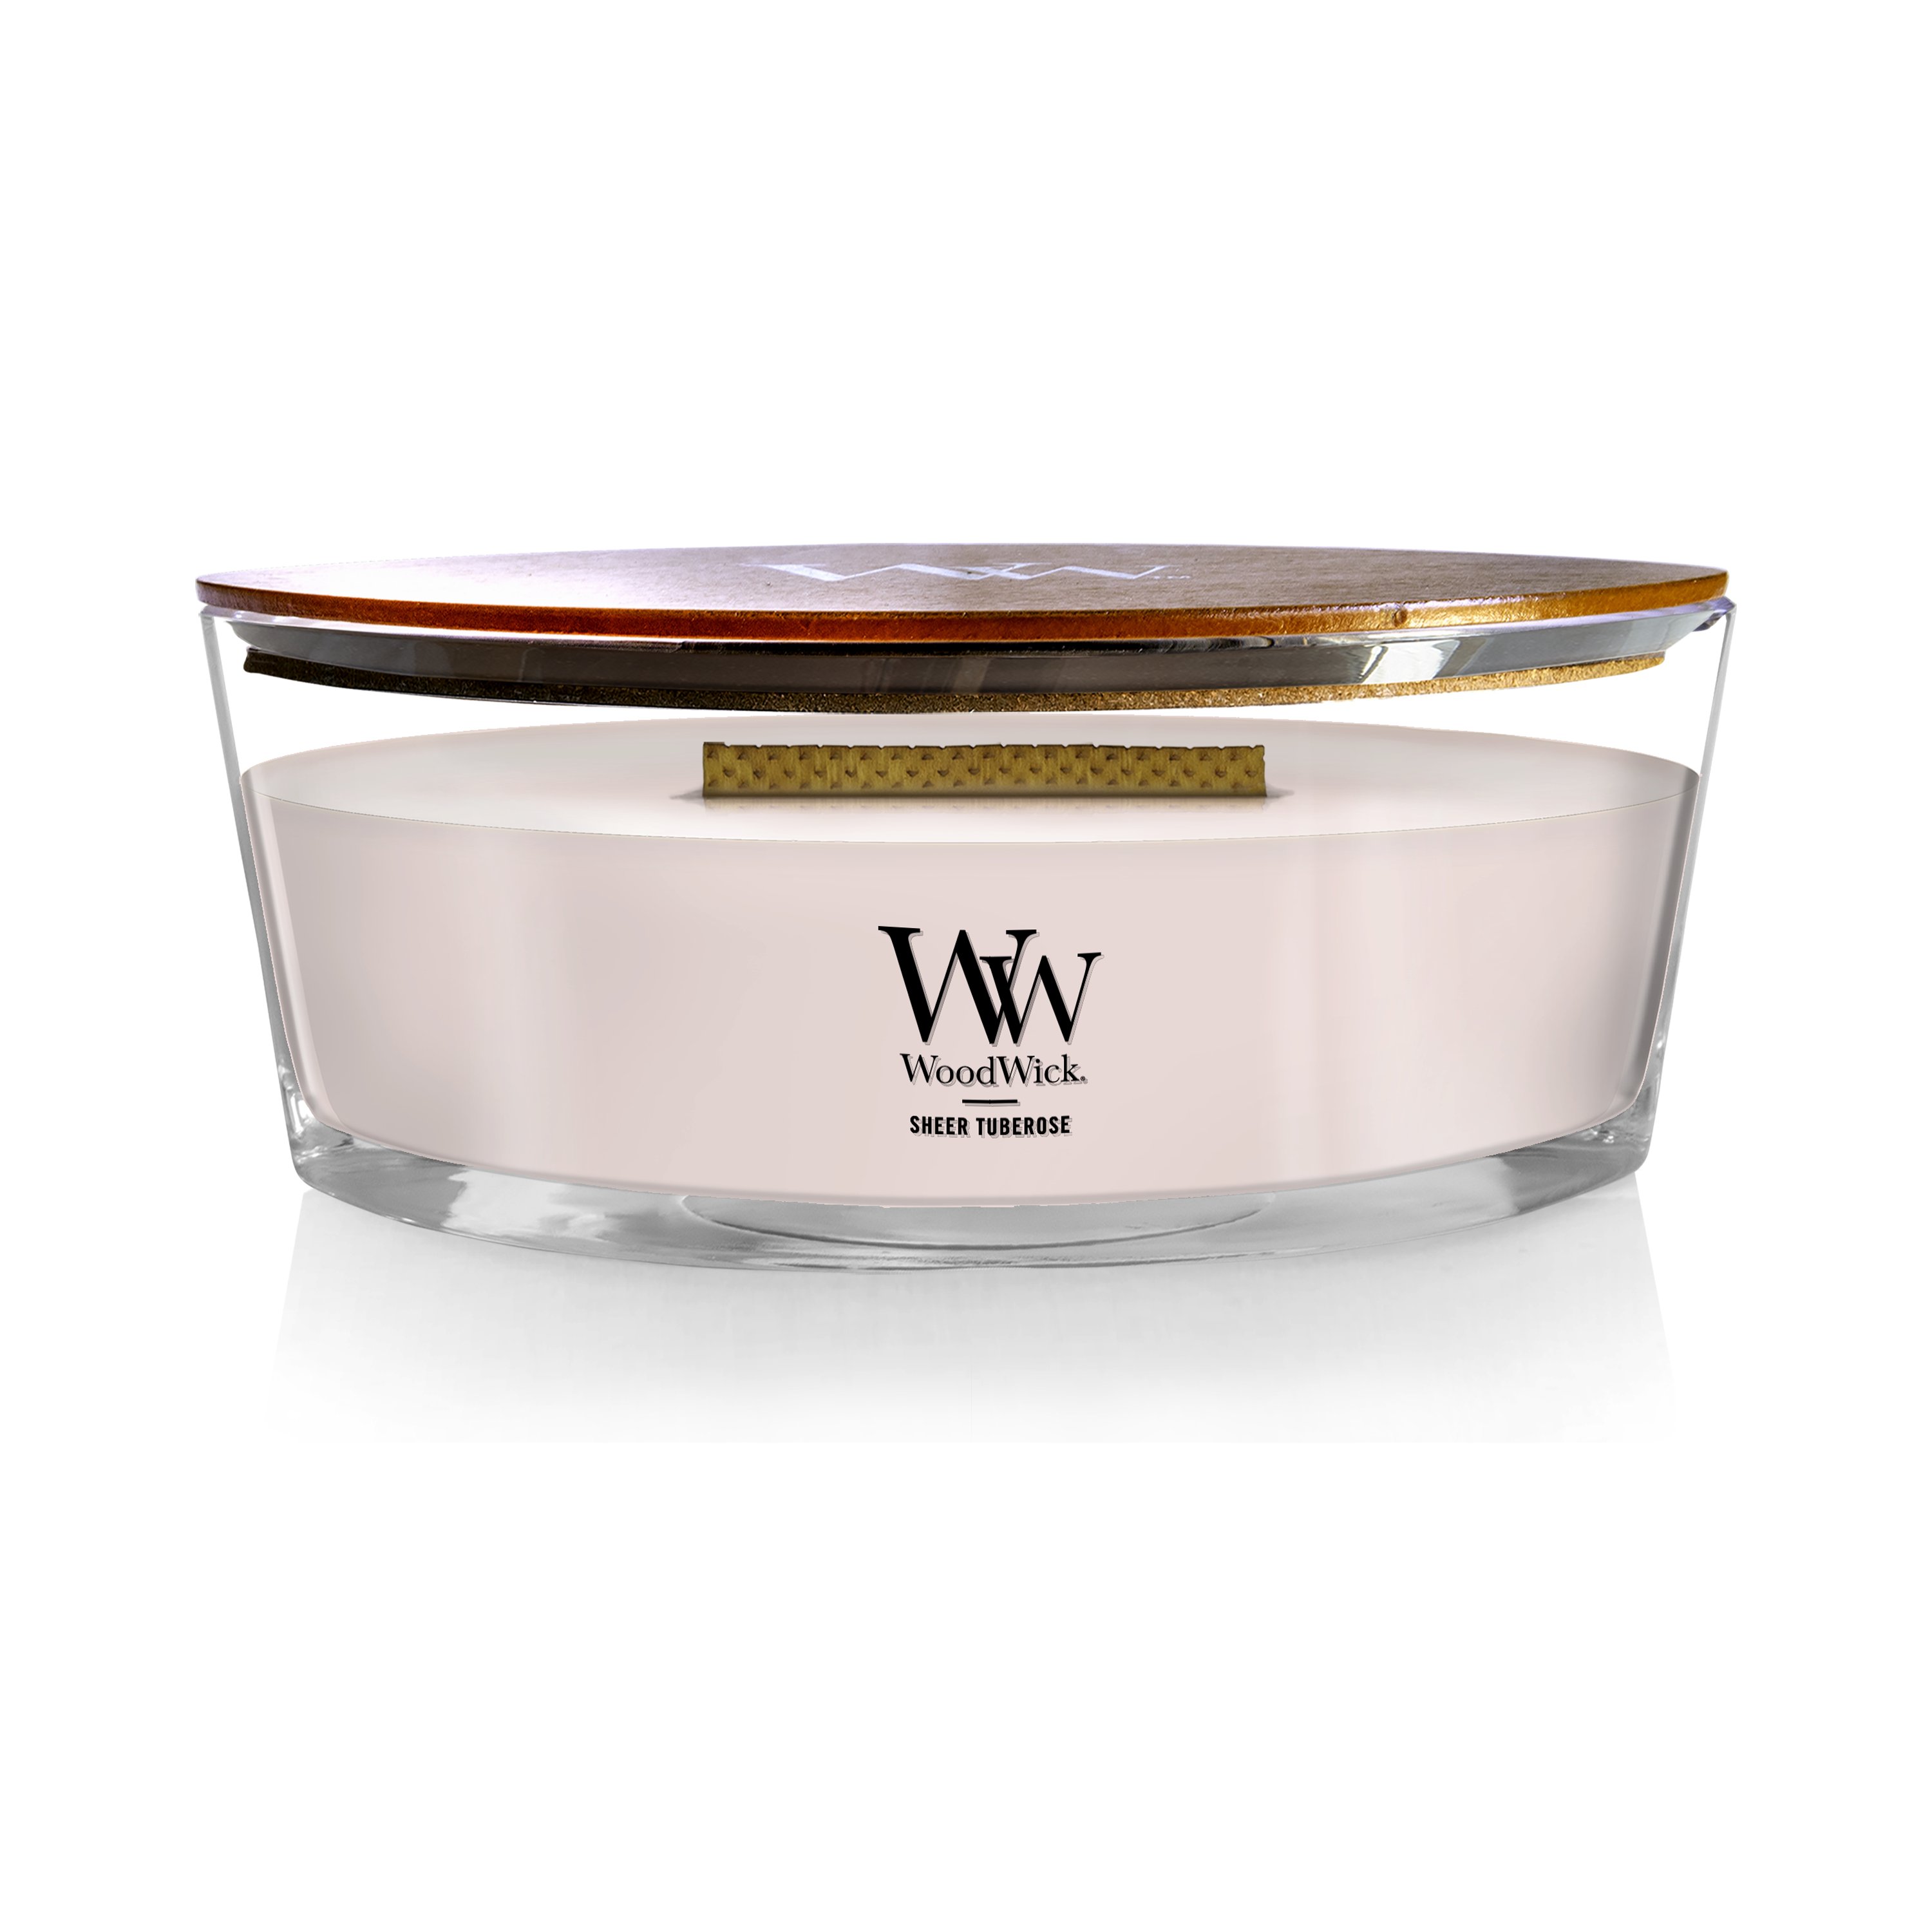 WoodWick Sheer Tuberose Candle - Scented Candle